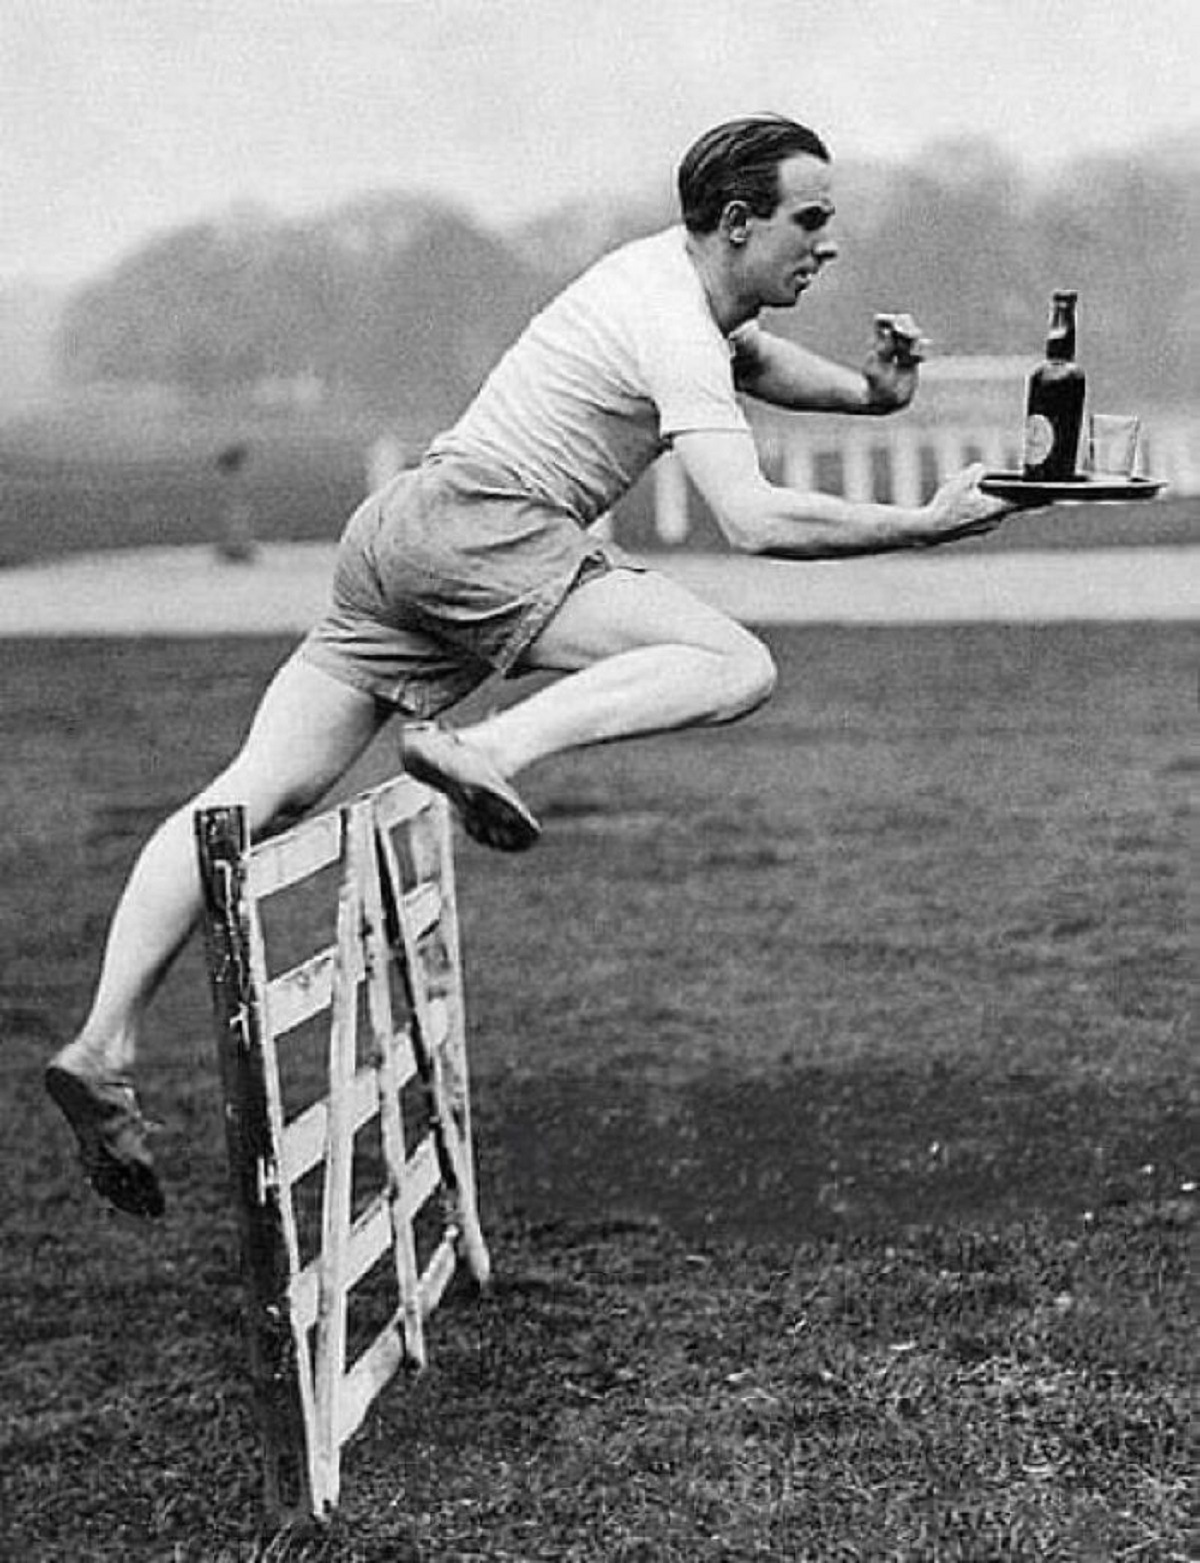 British Hurdler Percy Hodge Demonstrates The Perfect Obstacle Jump While Carrying A Bottle And A Glass On A Tray. Percy Hodge Became An Olympic Champion In The 3000m Hurdles In 1920